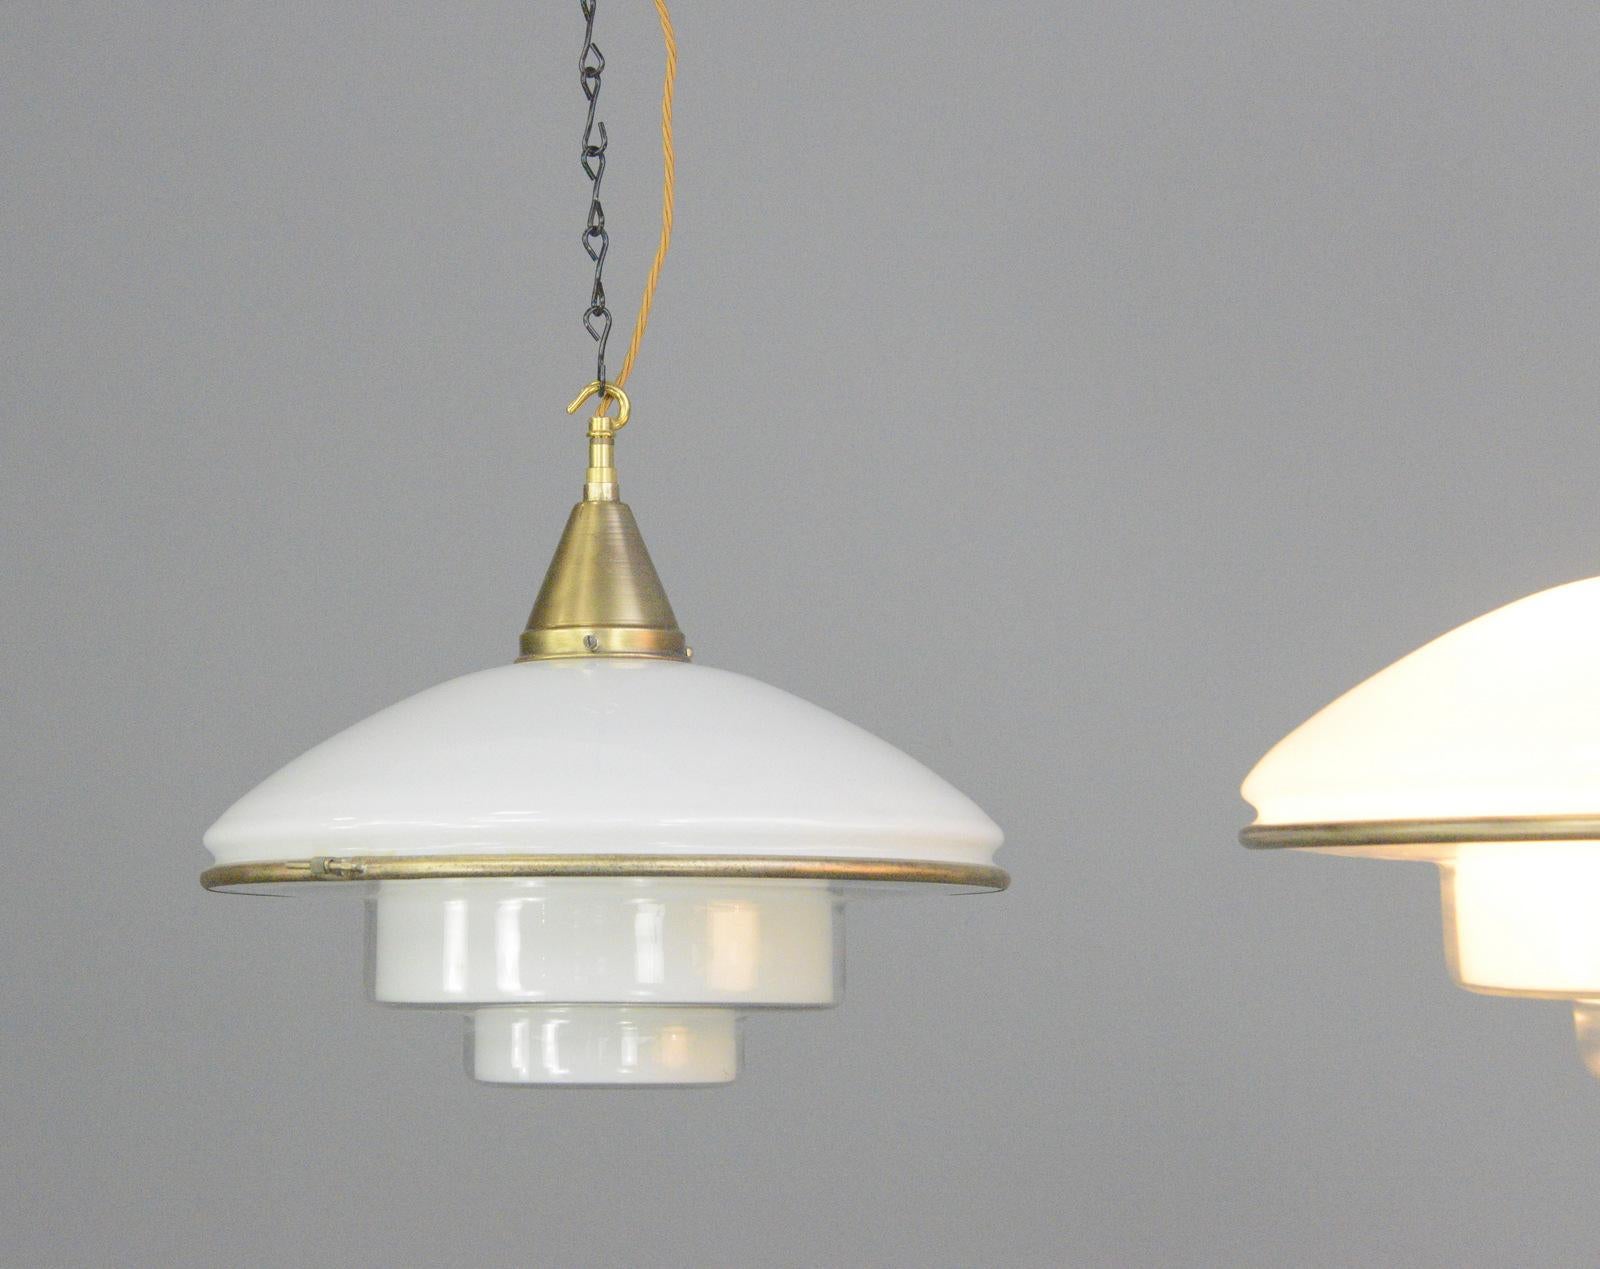 Sistrah P4 Pendant Lights by Otto Muller, Circa 1930s For Sale 2